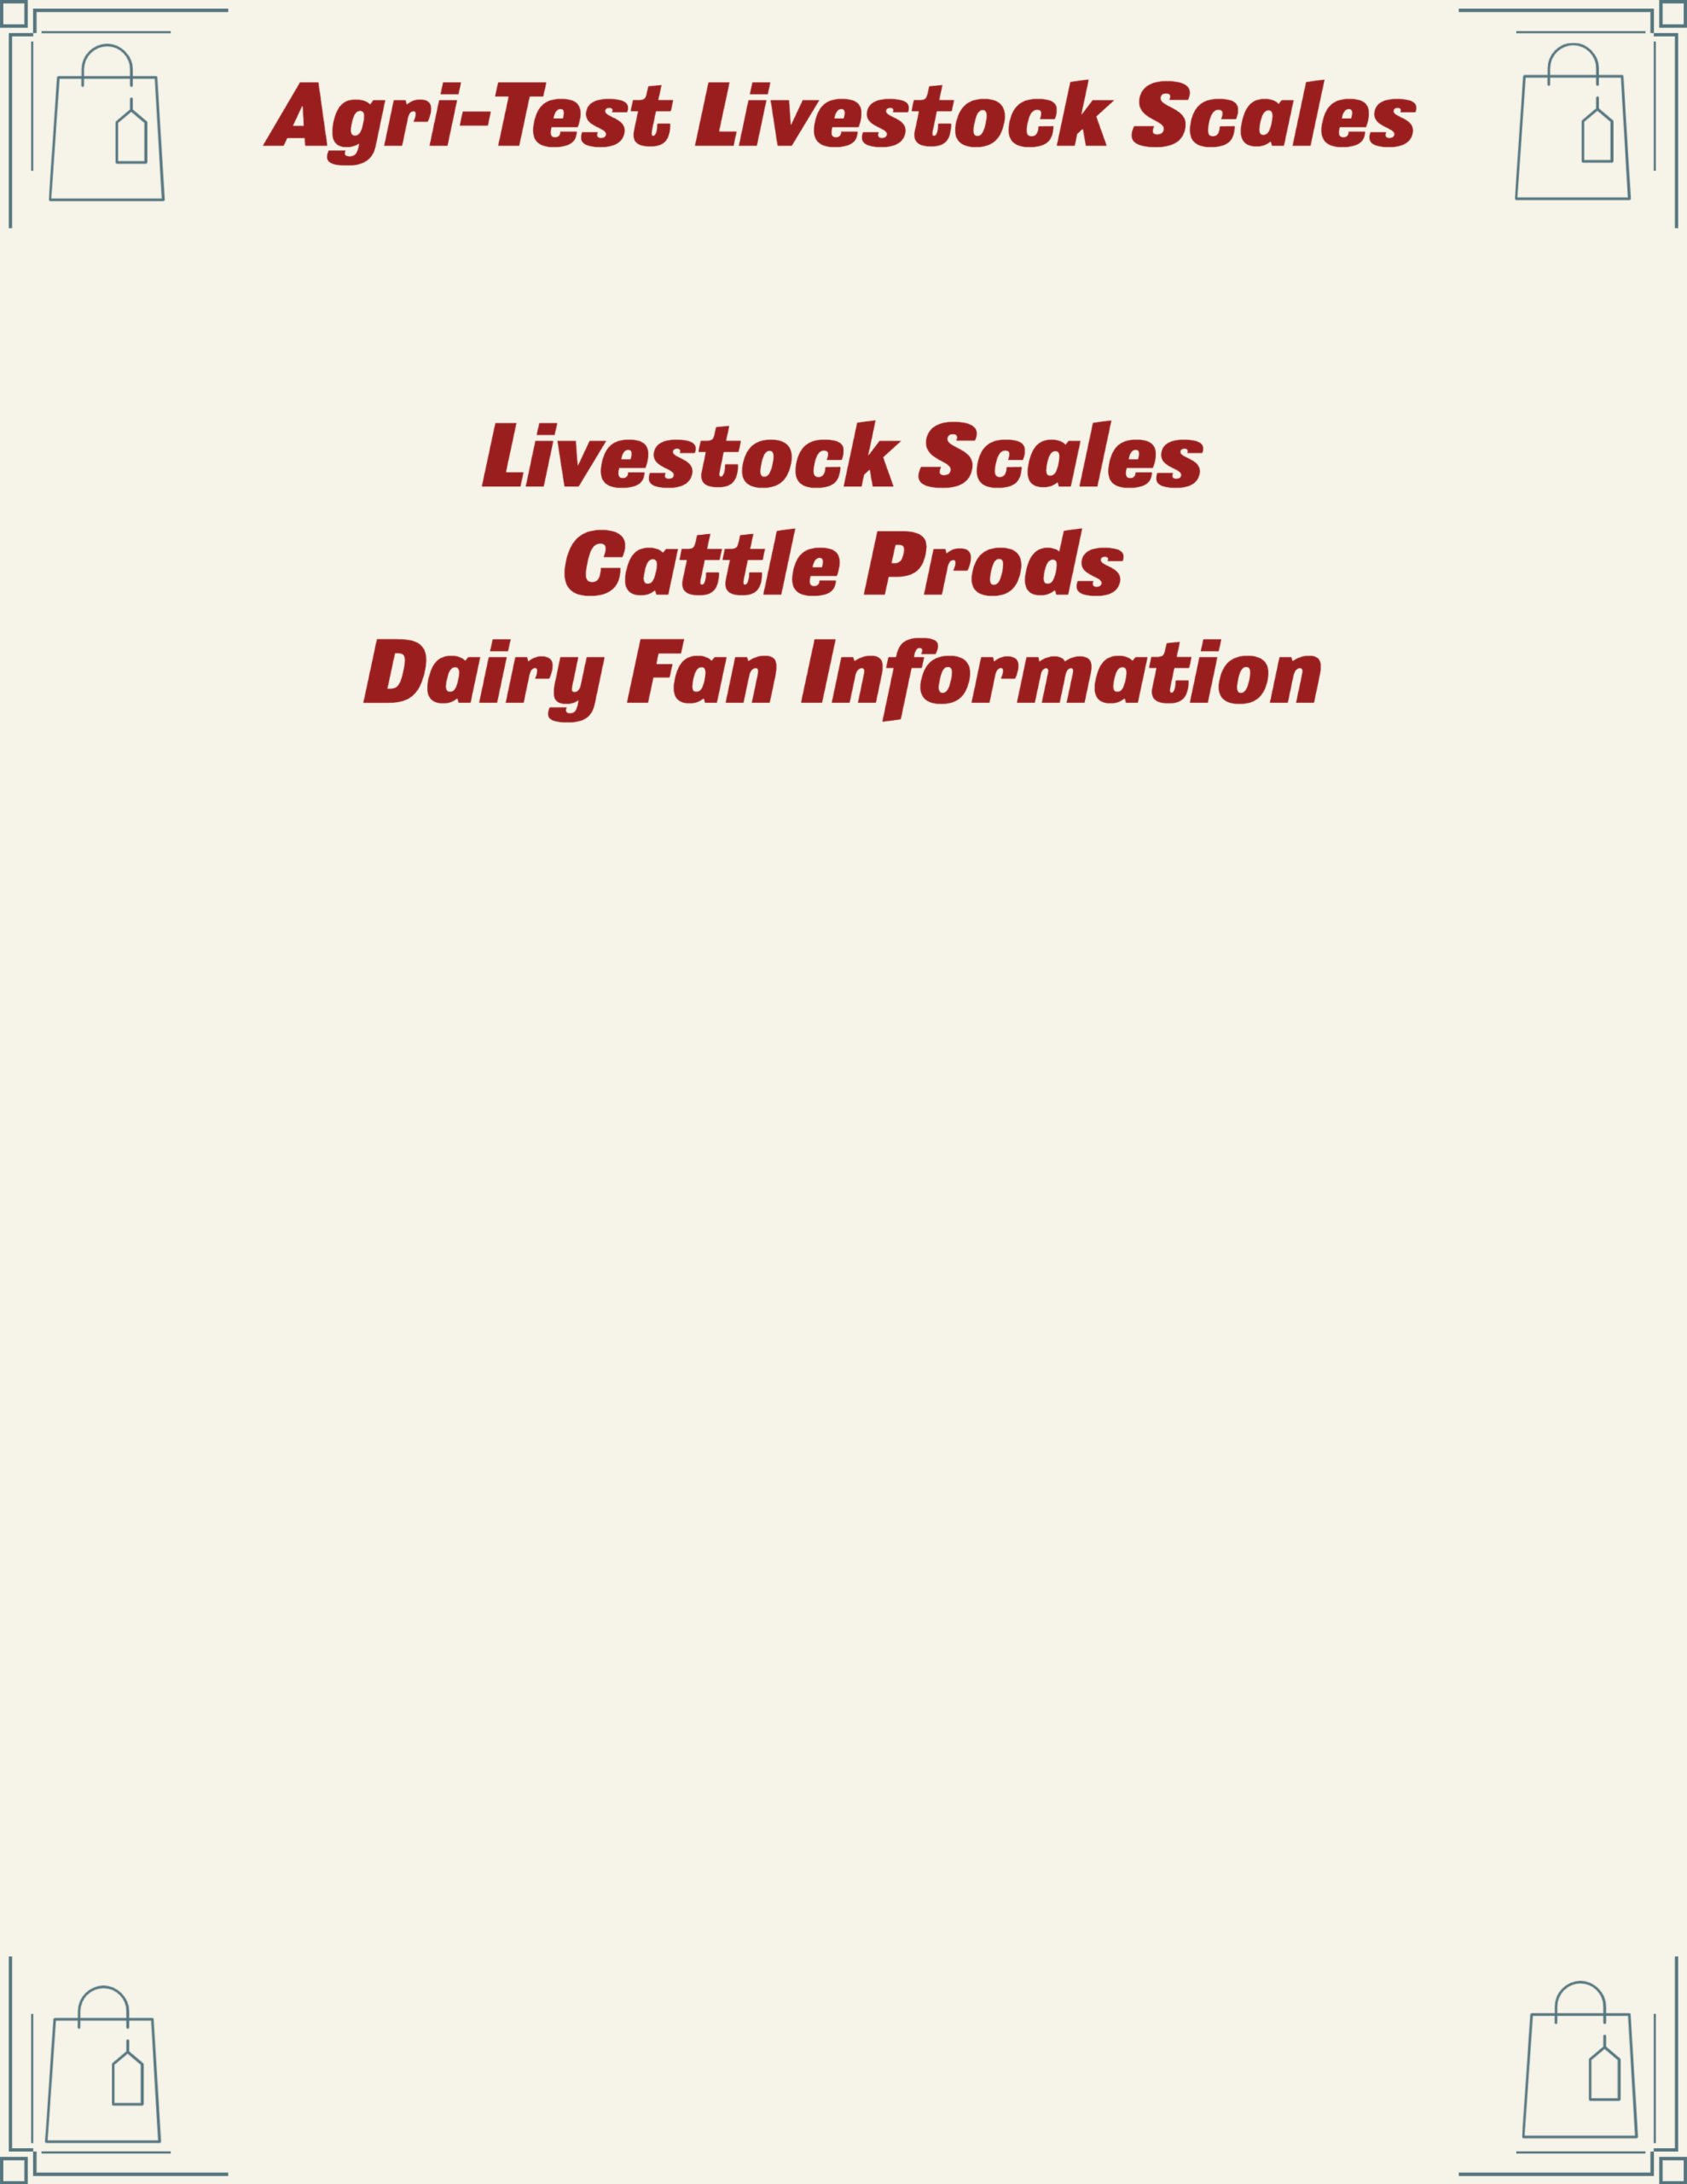 Agri Test Livestock Scales scaled